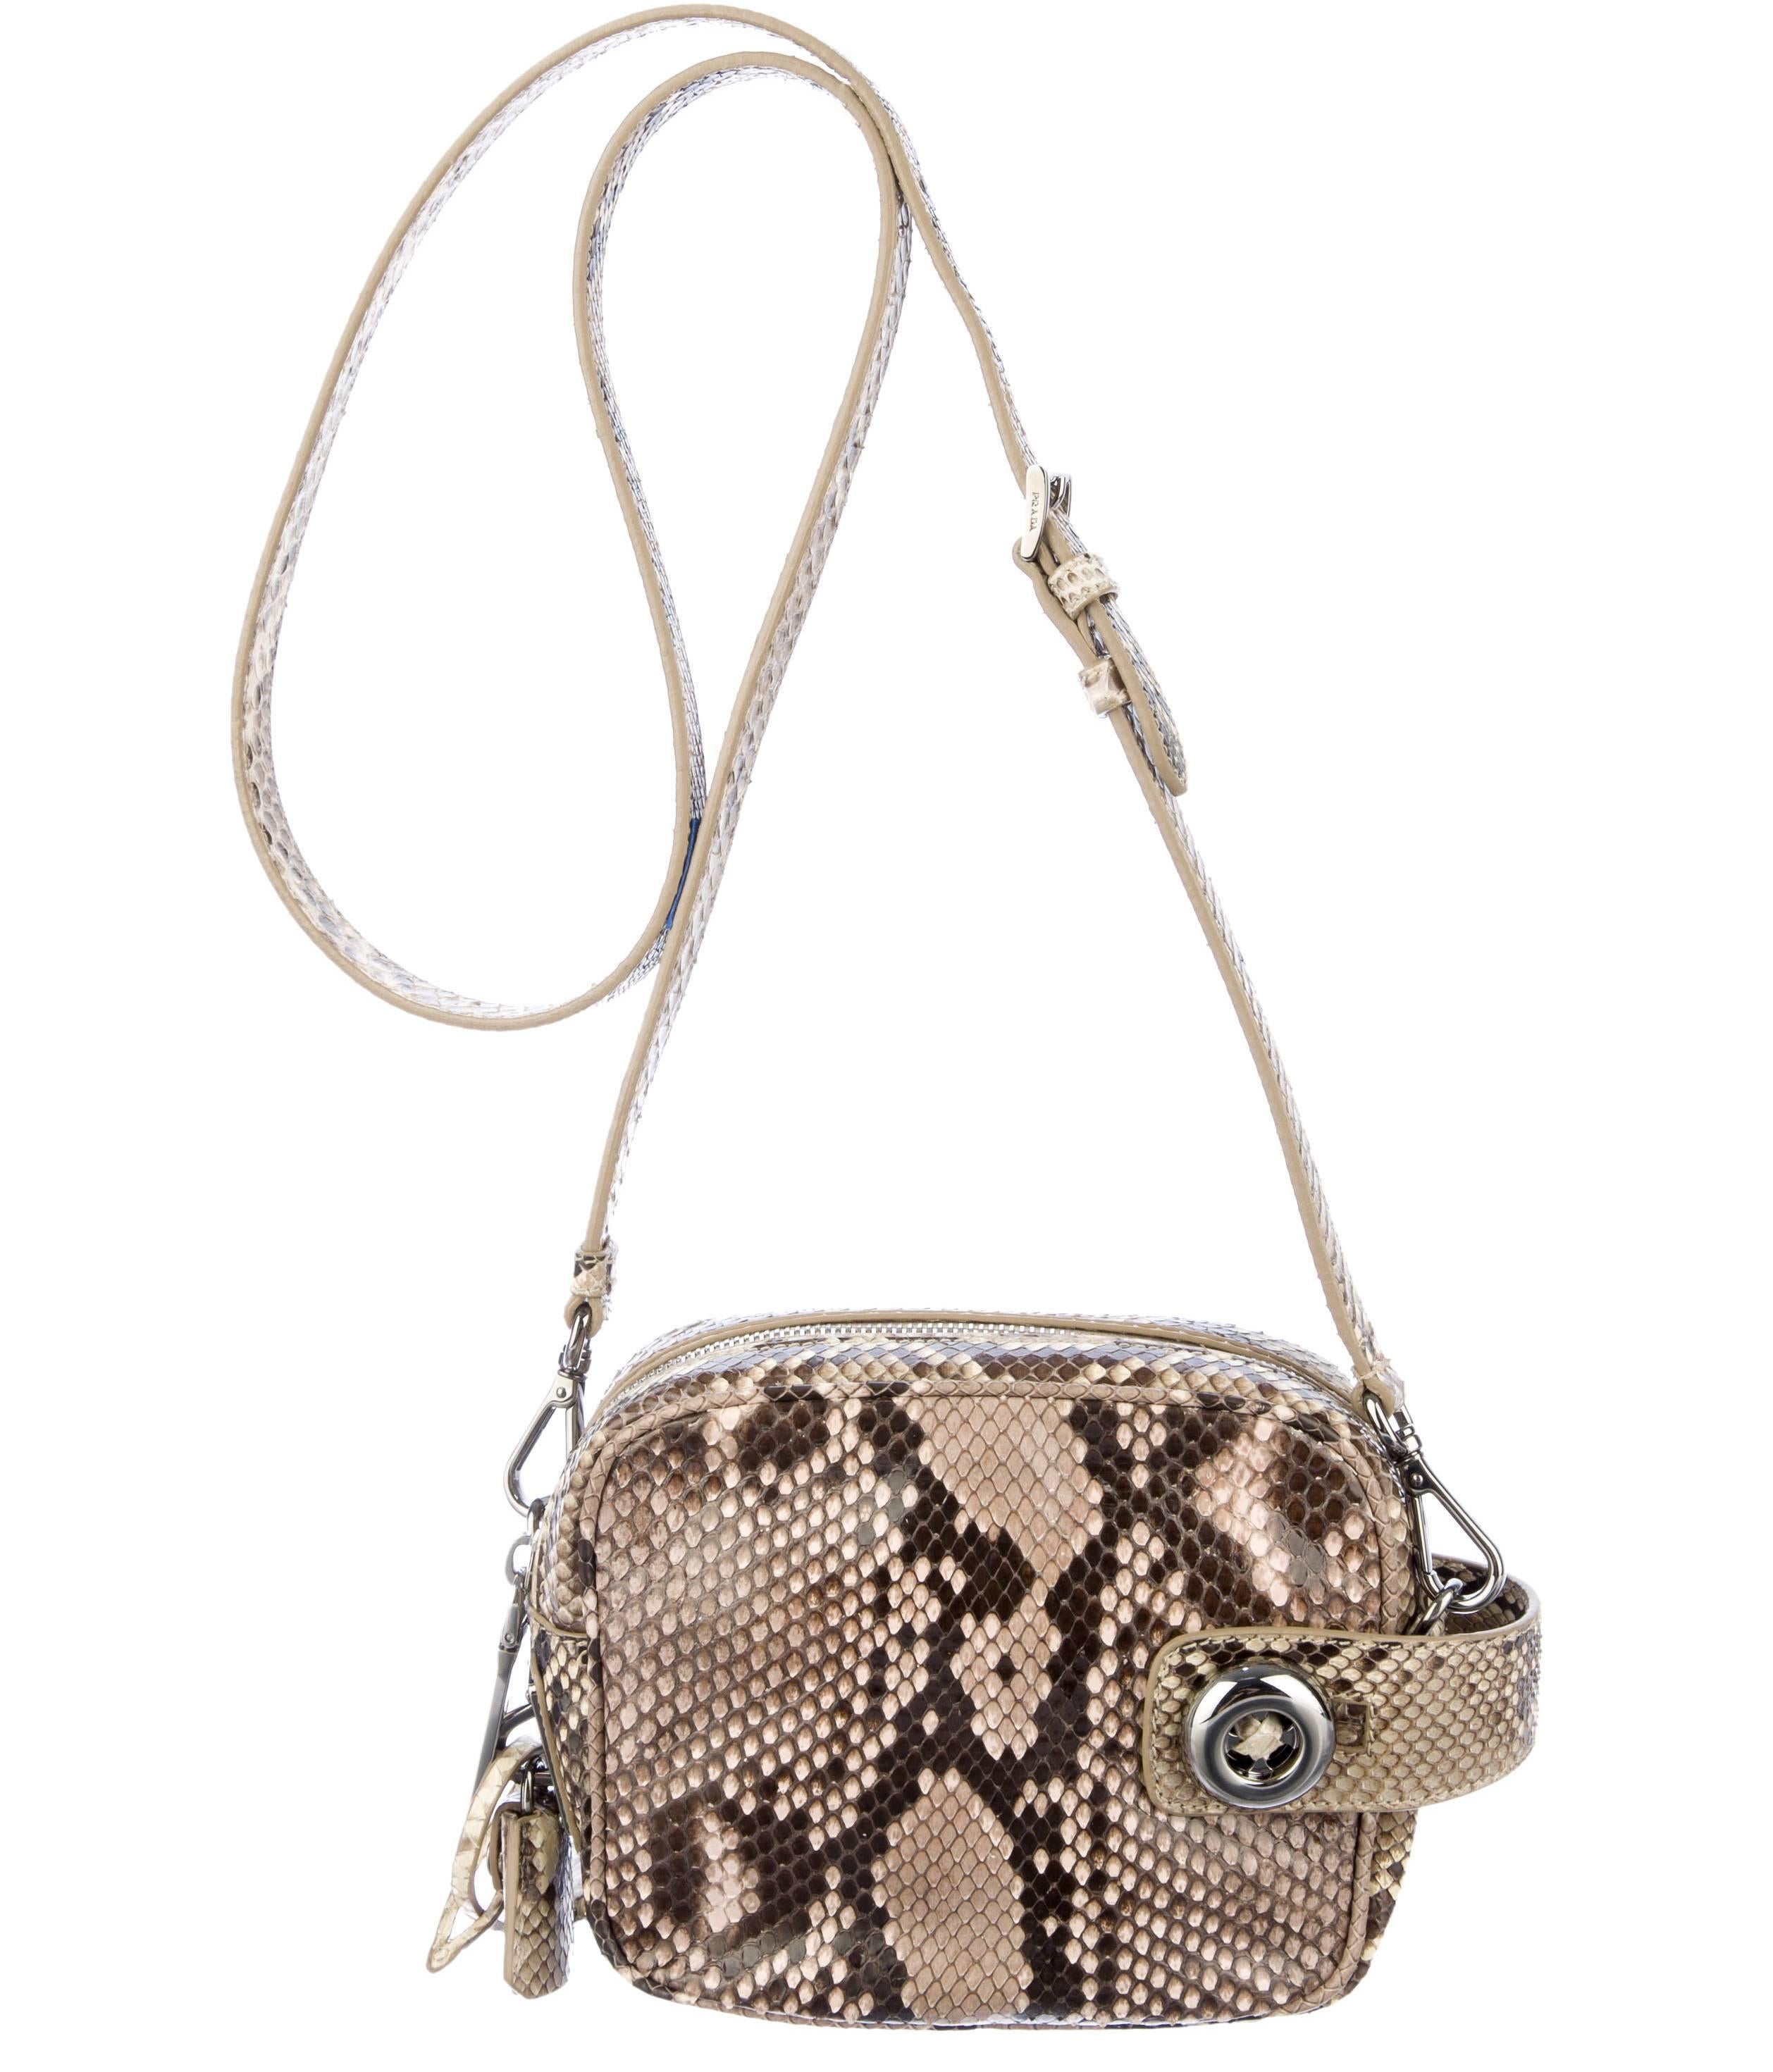 Gorgeous Prada python cross body bag in brown tones, with silver color hardware, removable and adjustable shoulder strap, leather lining, interior side pockets and top zip closure. Original dust bag included.
From the 2011 Runway Collection.